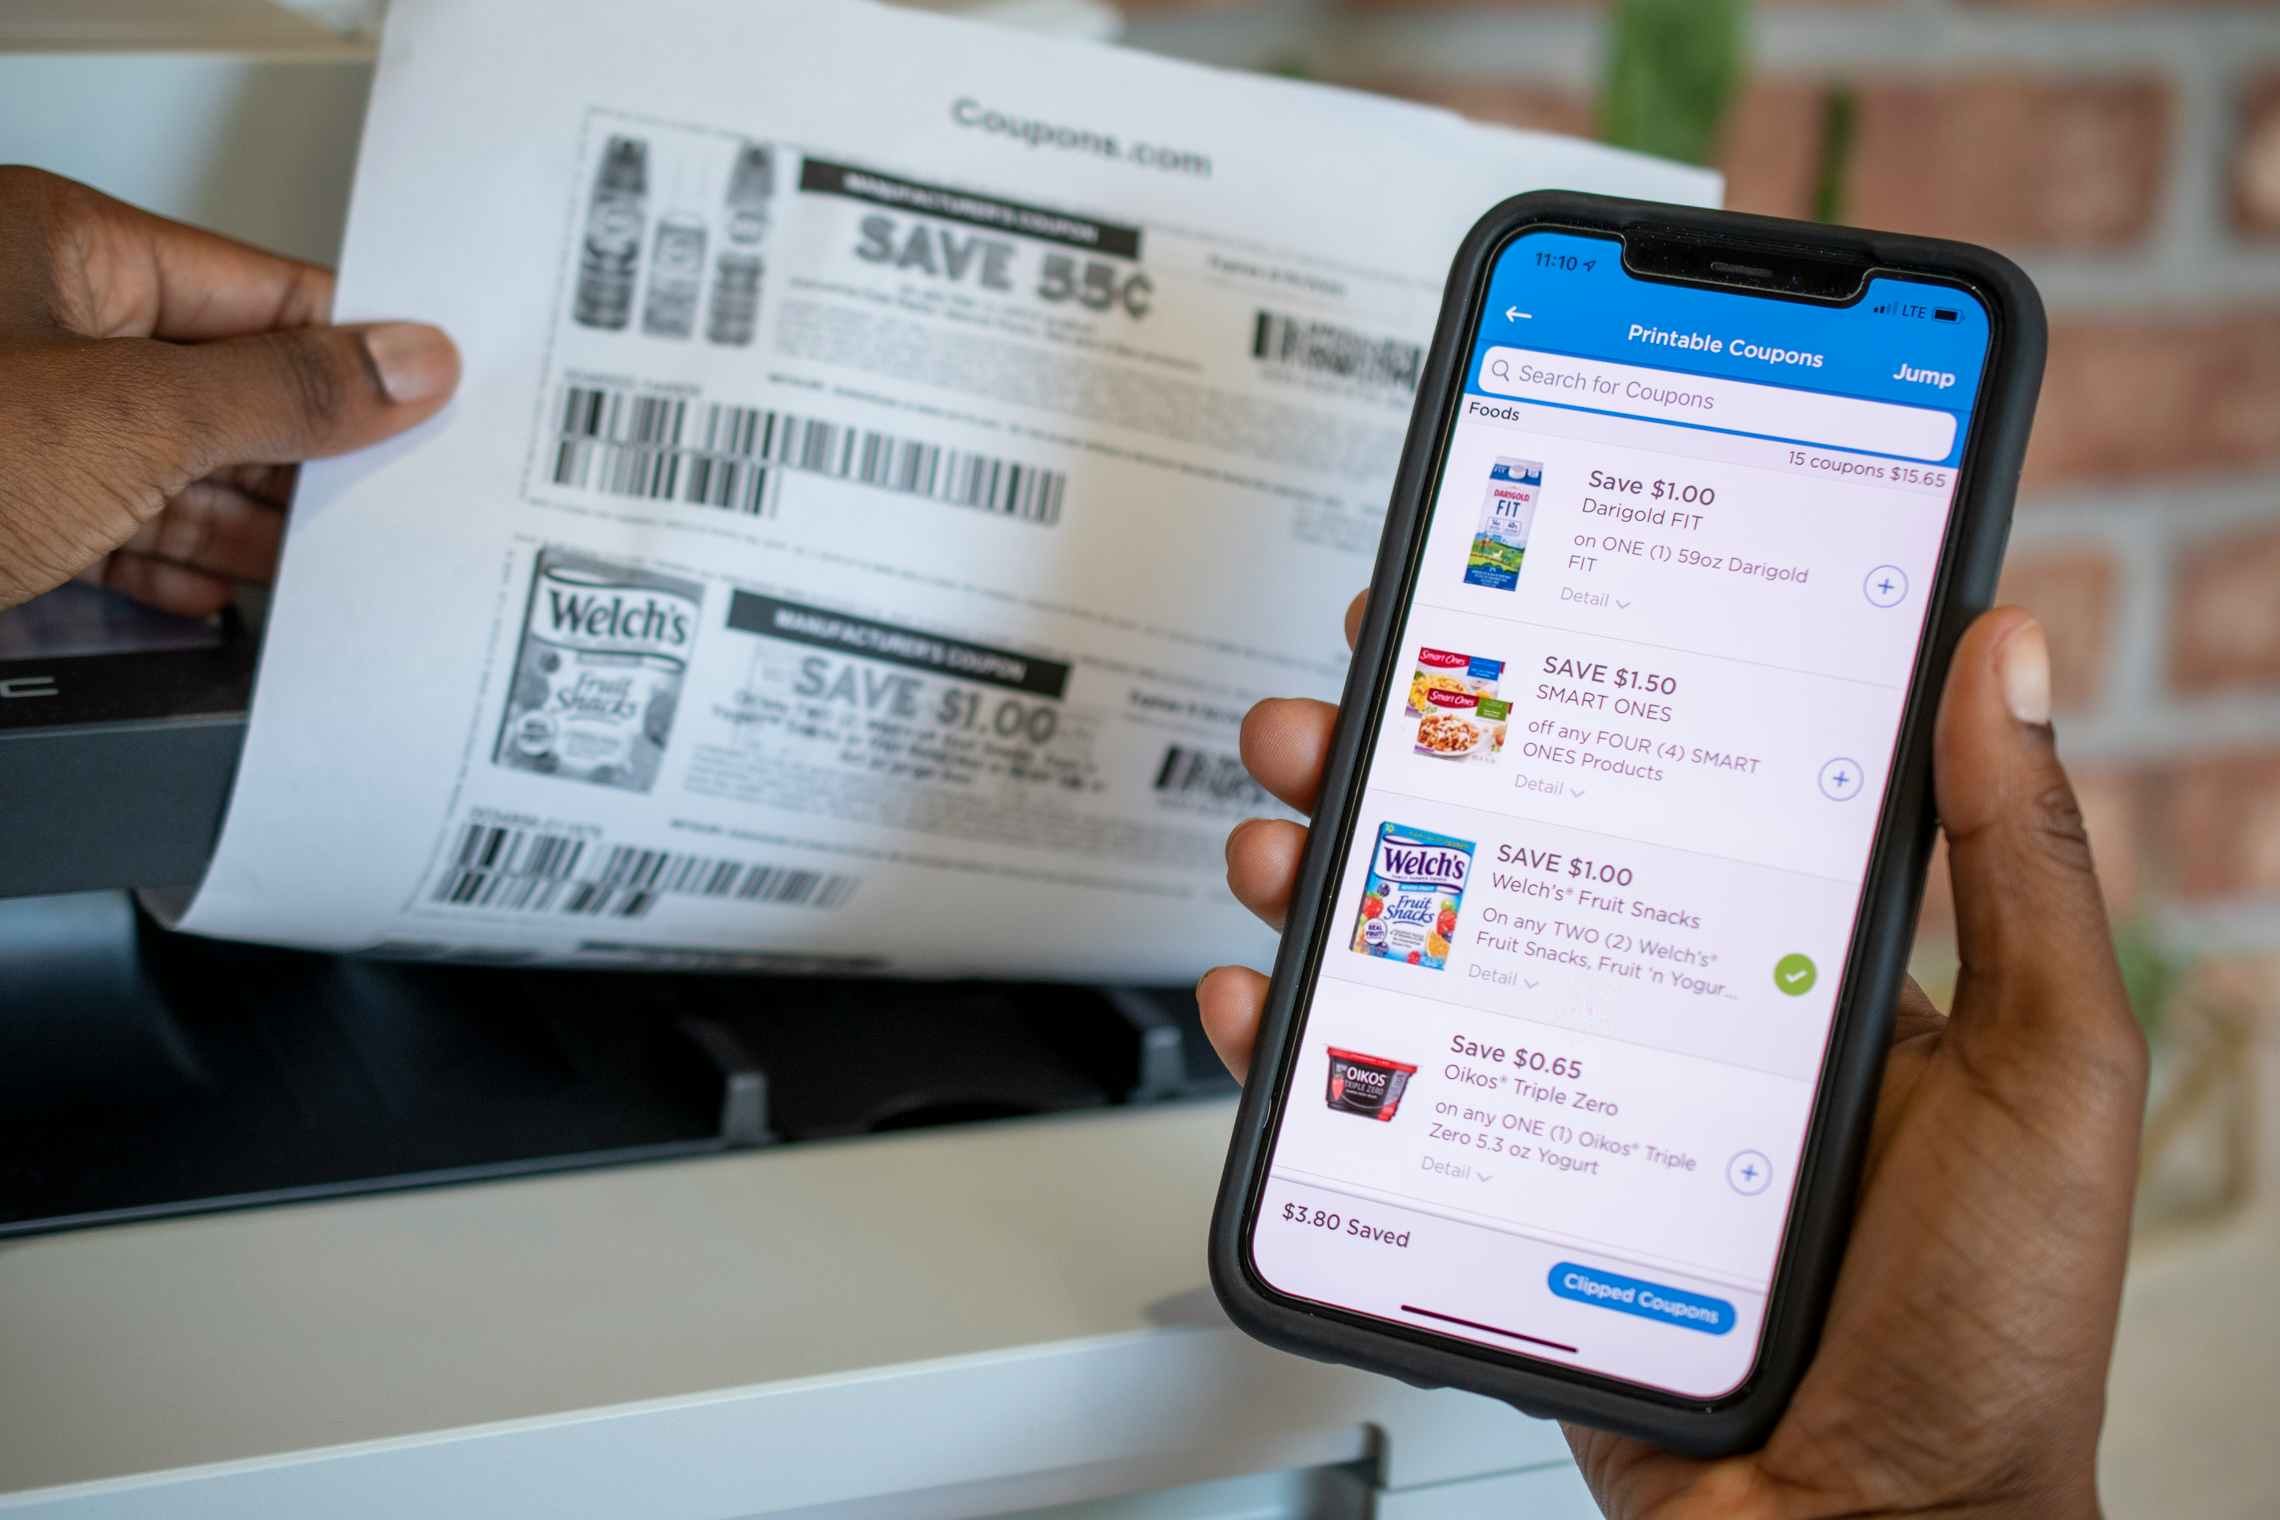 A person's hands, one holding up an iPhone with the Coupons.com mobile app open to the Printable Coupons page, and the other hand taking a sheet of paper with coupons printed on it out of a printer.